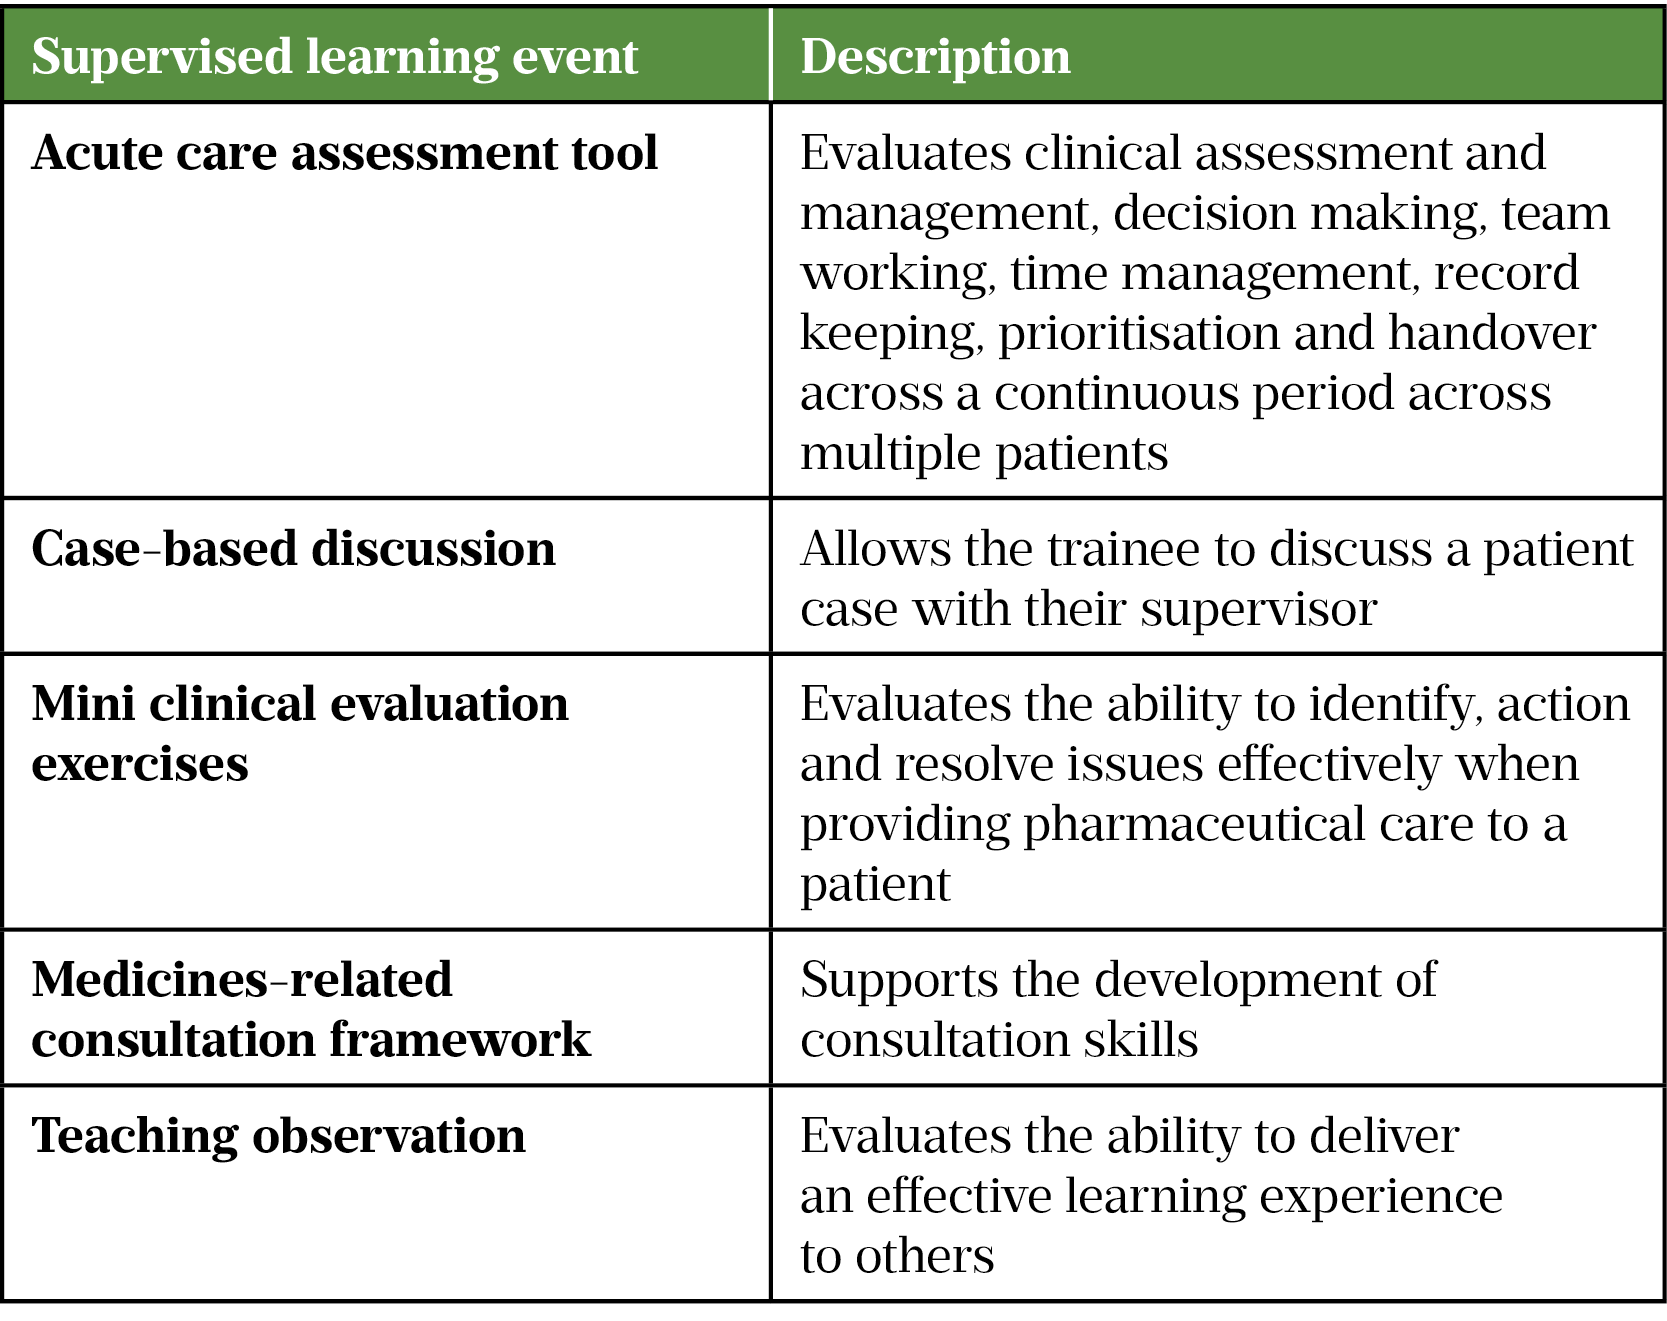 Table: Examples of supervised learning events used in pharmacy practice